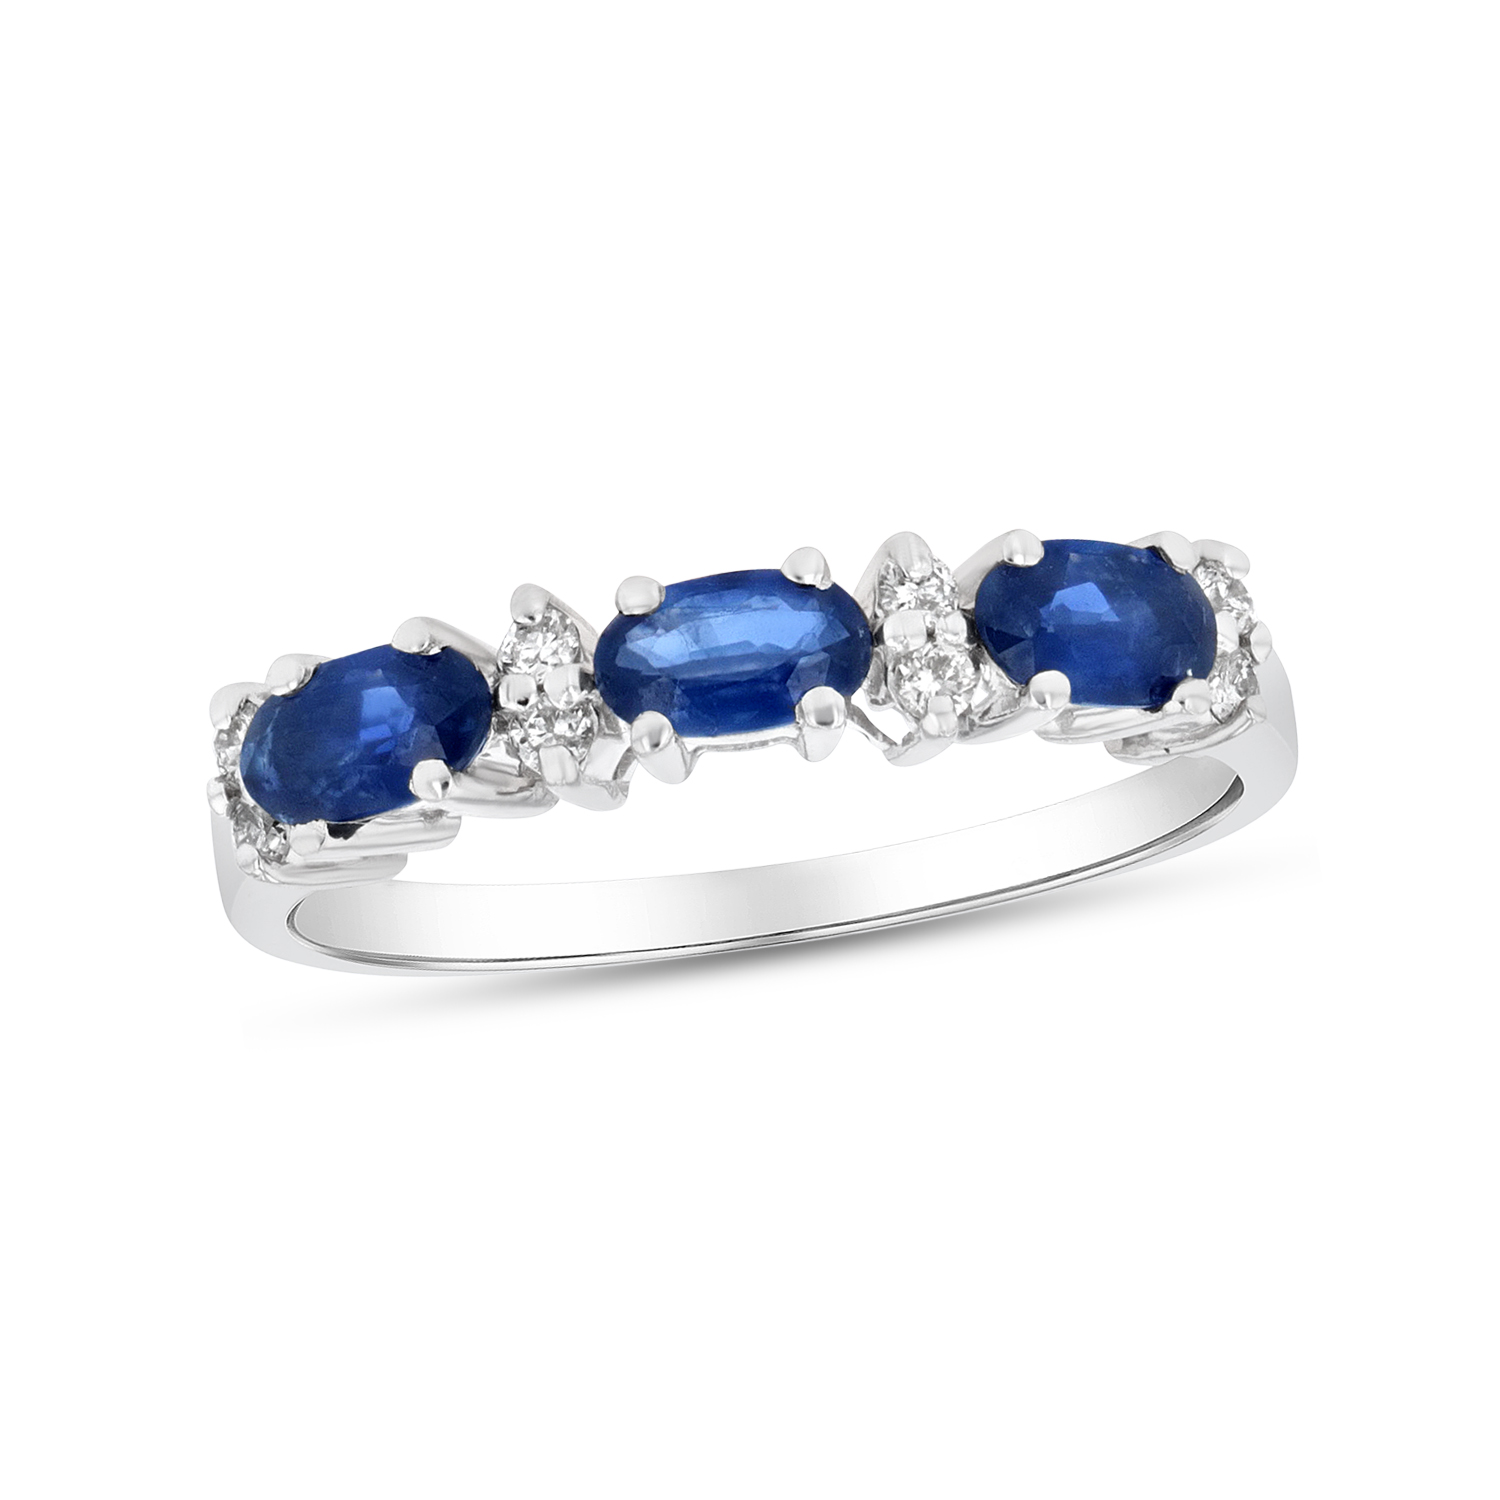 View 1.05ctw Diamond and Sapphire Band in 14k White Gold